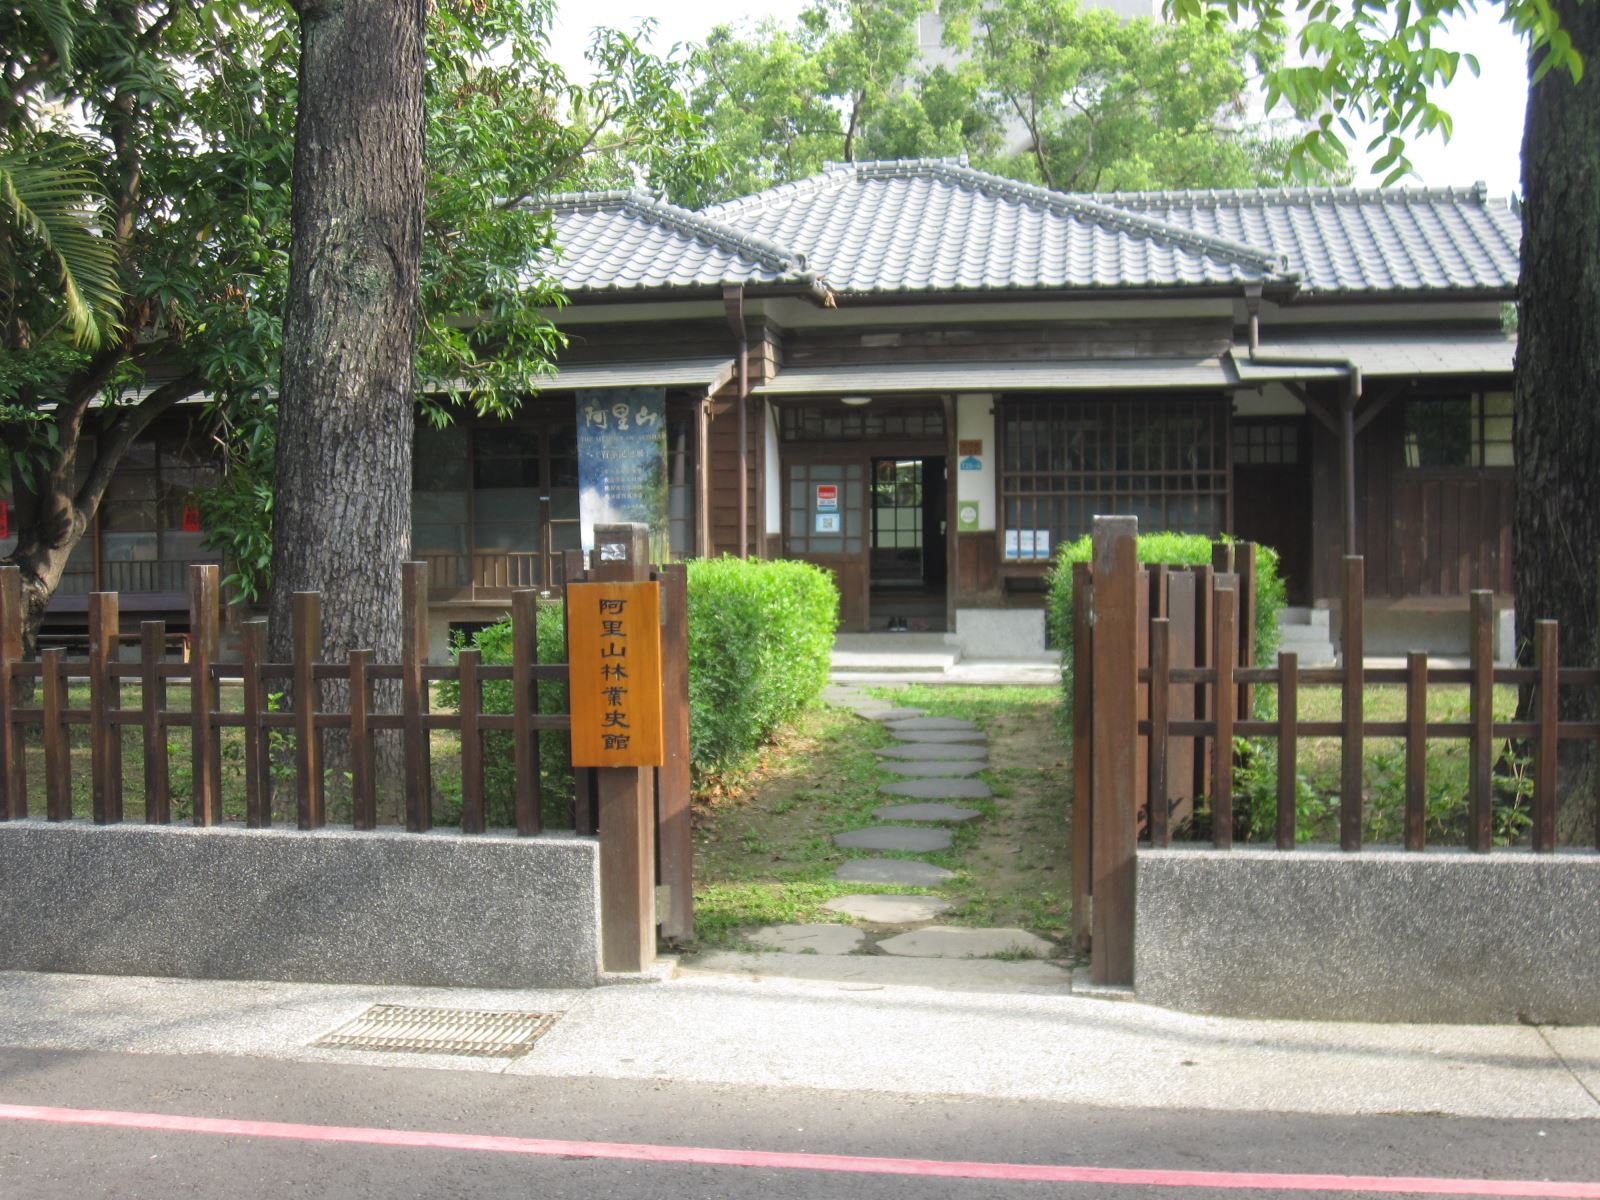 Forestry Historical Museum